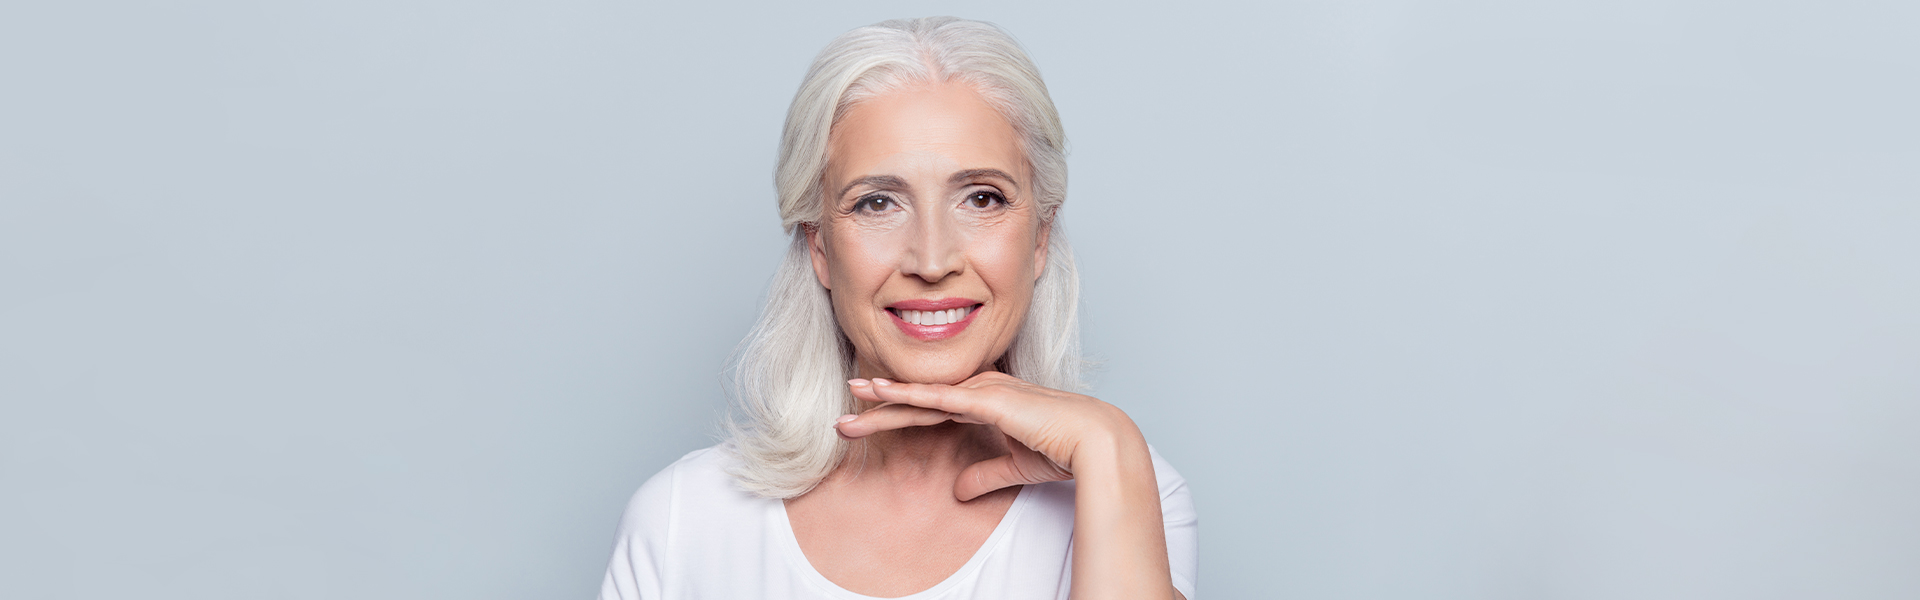 How Can Dental Implants Give You Your Smile Back?